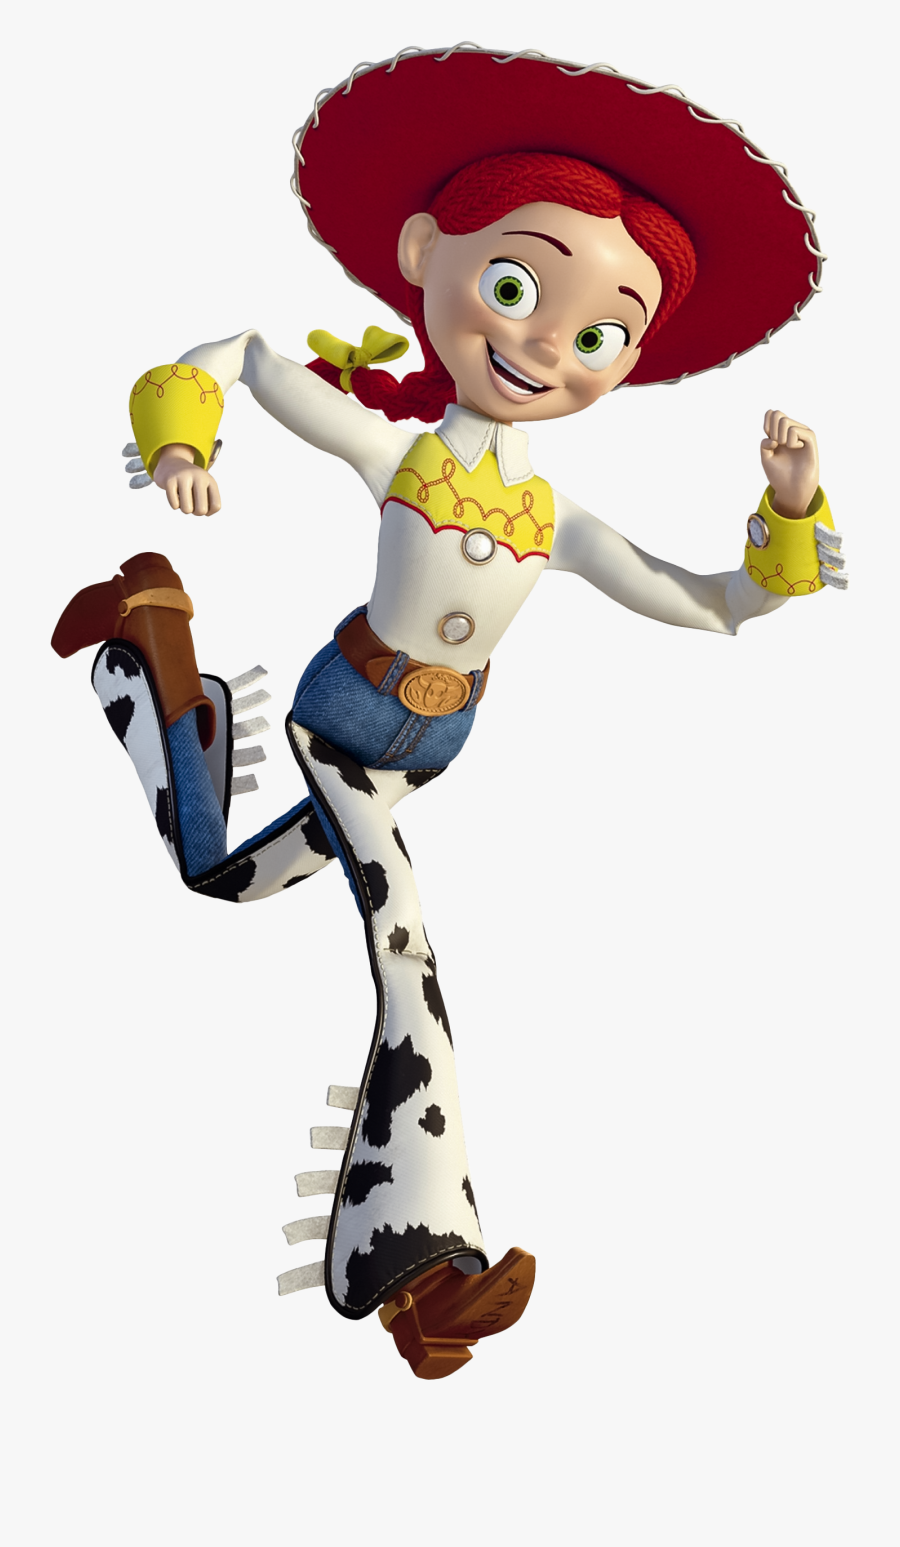 Jessie Png Cartoon Image - Jessie Toy Story Characters Png, Transparent Clipart